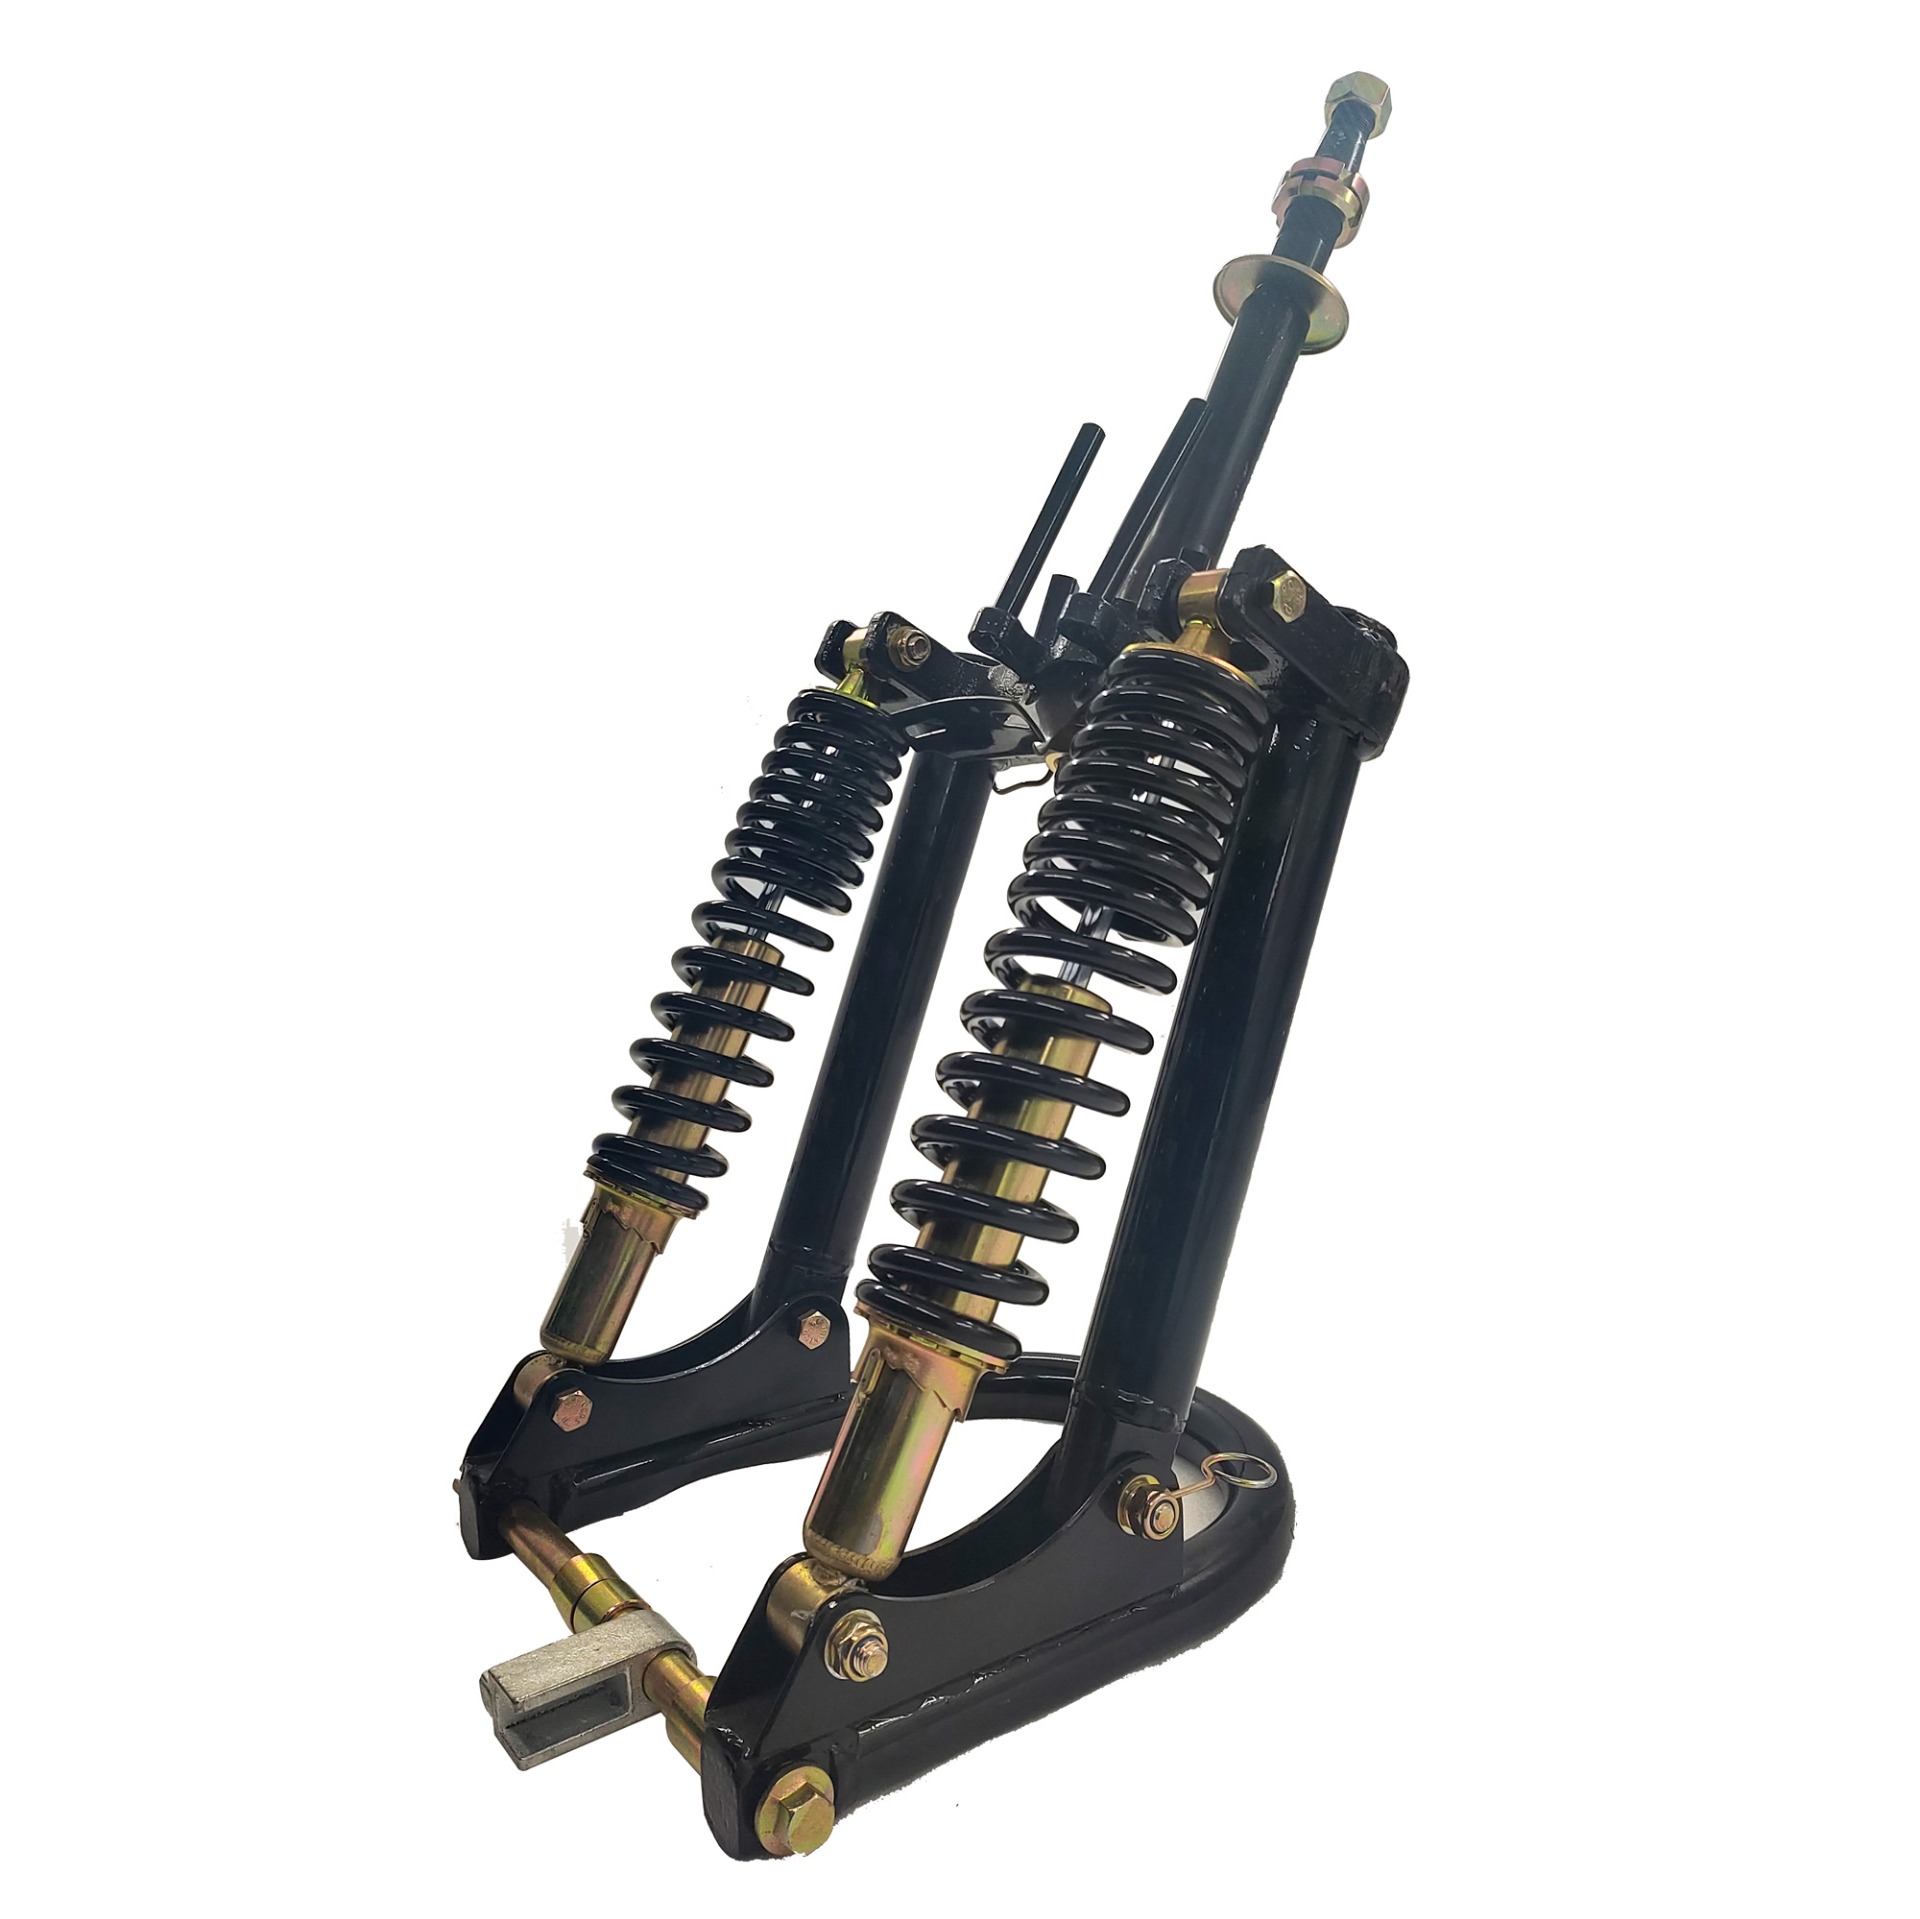 Tricycle spare parts All-terrain hydraulic front shock absorber  sturdy 270 cradle shock absorber from DAYANG for tricycles